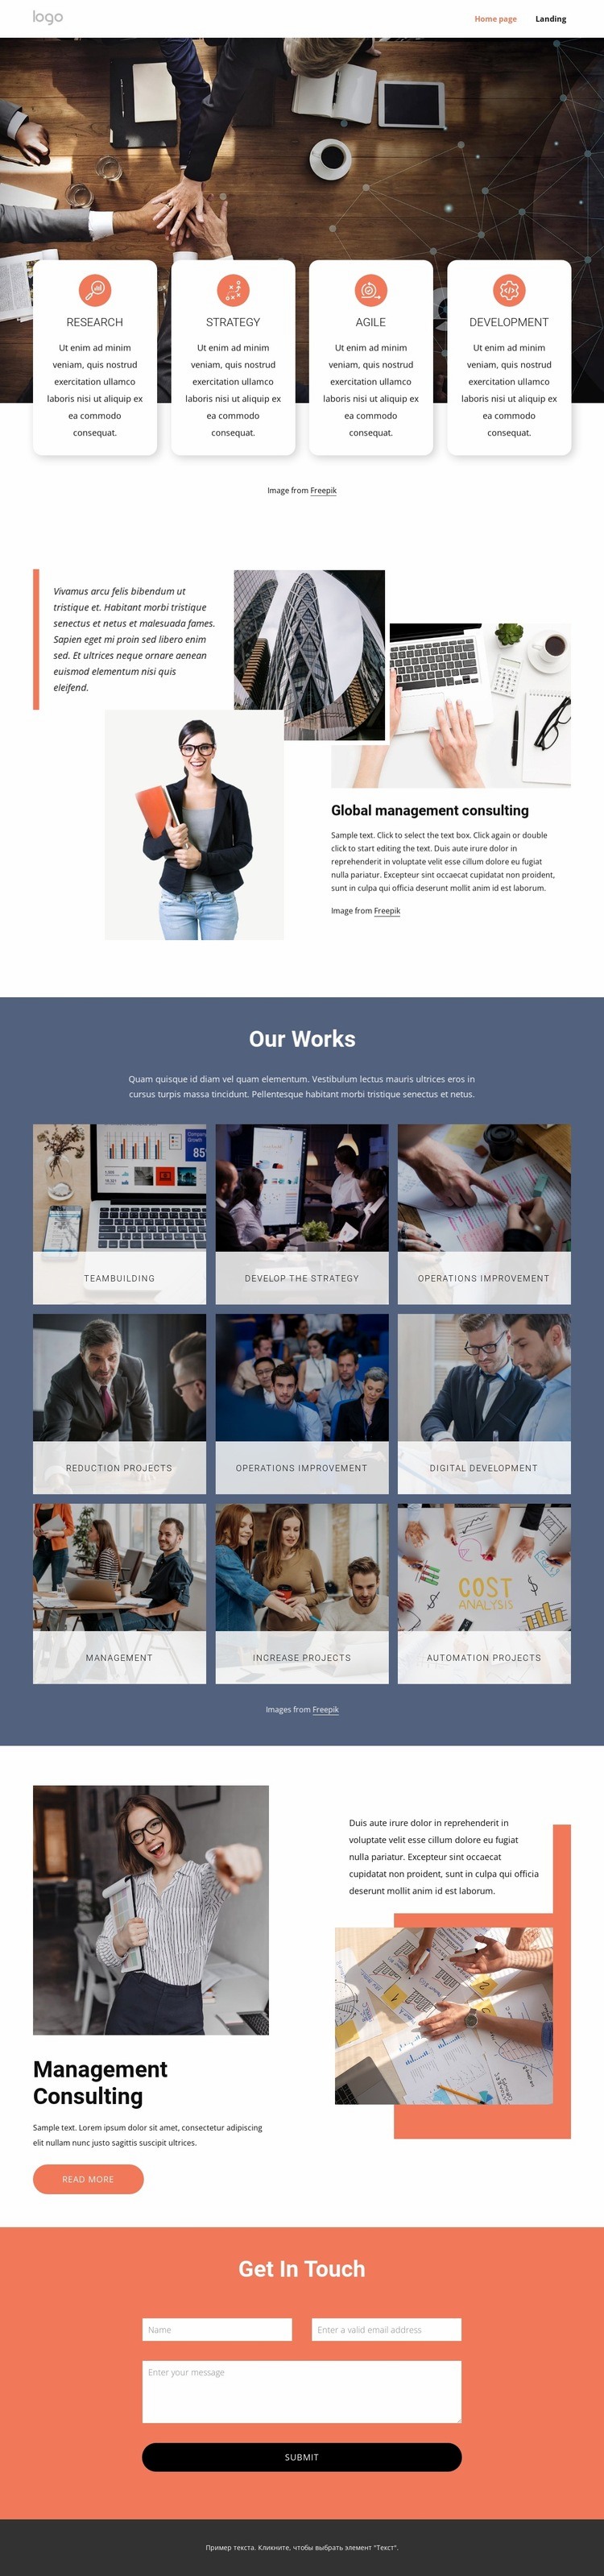 The leading consulting firms for management services Homepage Design